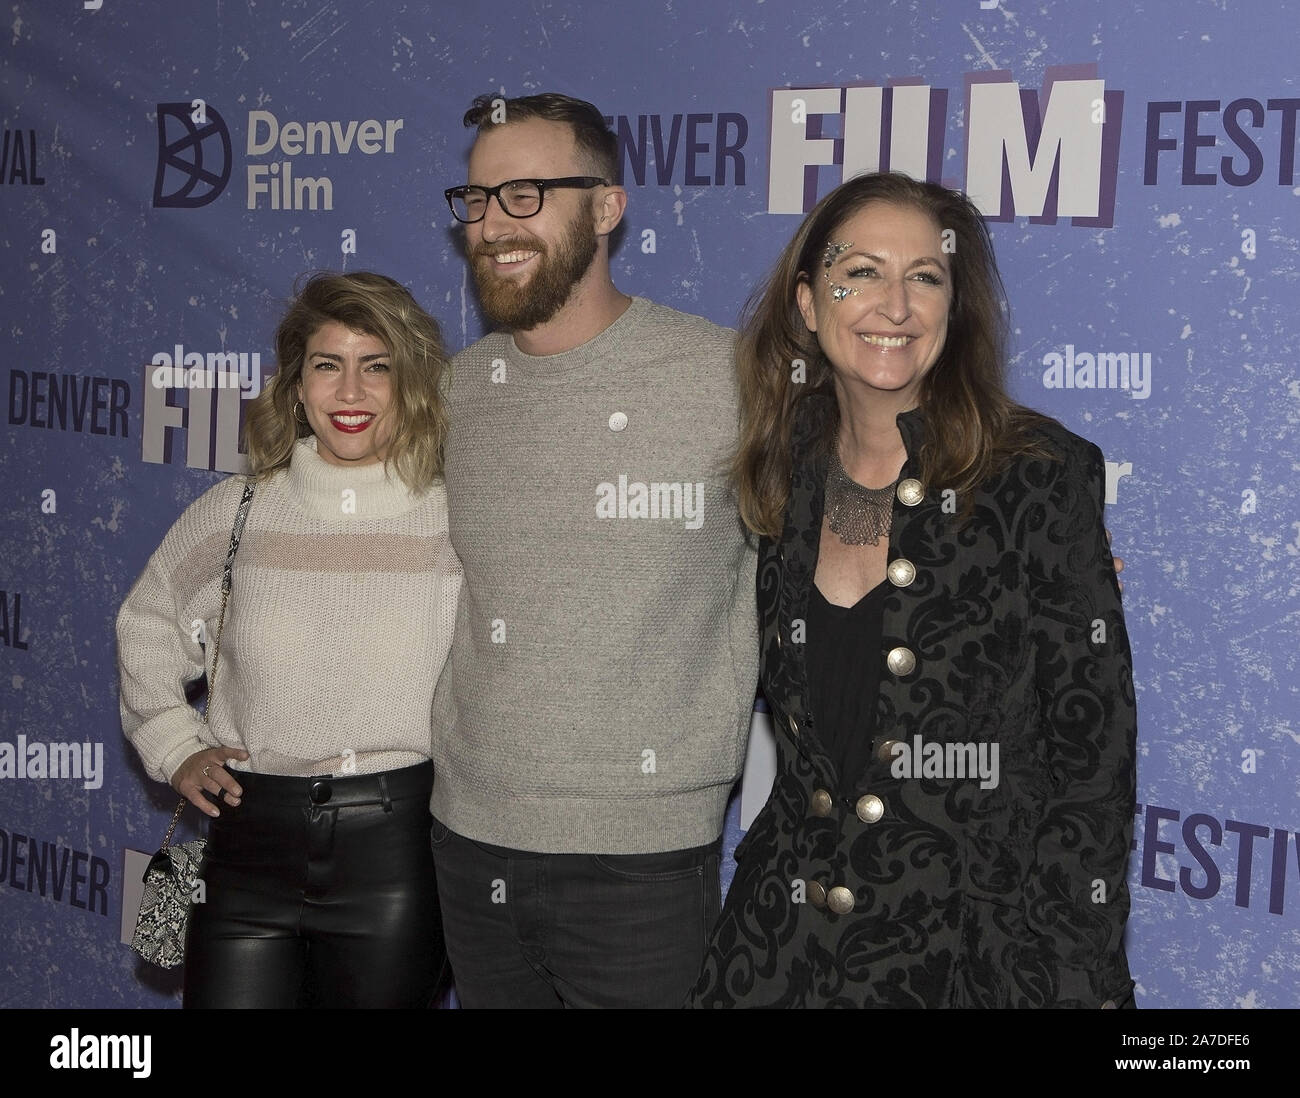 October 31, 2019, Denver, Colorado, U.S: BRODA LEE, left, CALEB WARD, middle, MARY-LYN CHAMBERS, right, of the film Krzysztof Kieslowski Jury during the Red Carpet for the Opening of the Denver Film Festival Thursday night at the Temple Buell Theater in Denver CO. (Credit Image: © Hector Acevedo/ZUMA Wire) Stock Photo